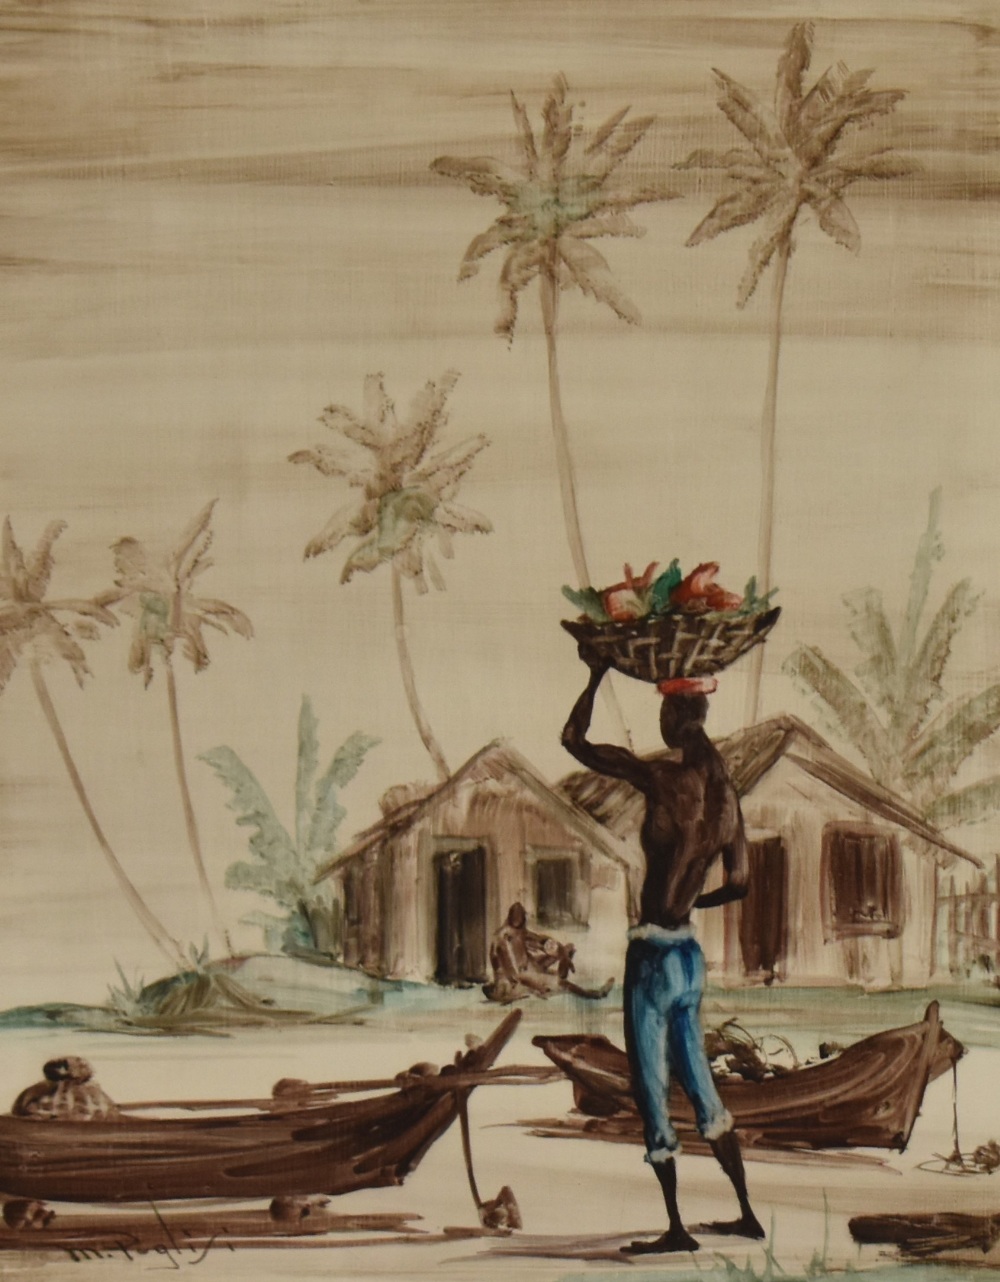 Maximo Puglisi, painting on board, Untitled, An African scene depicting a man carrying a basket of